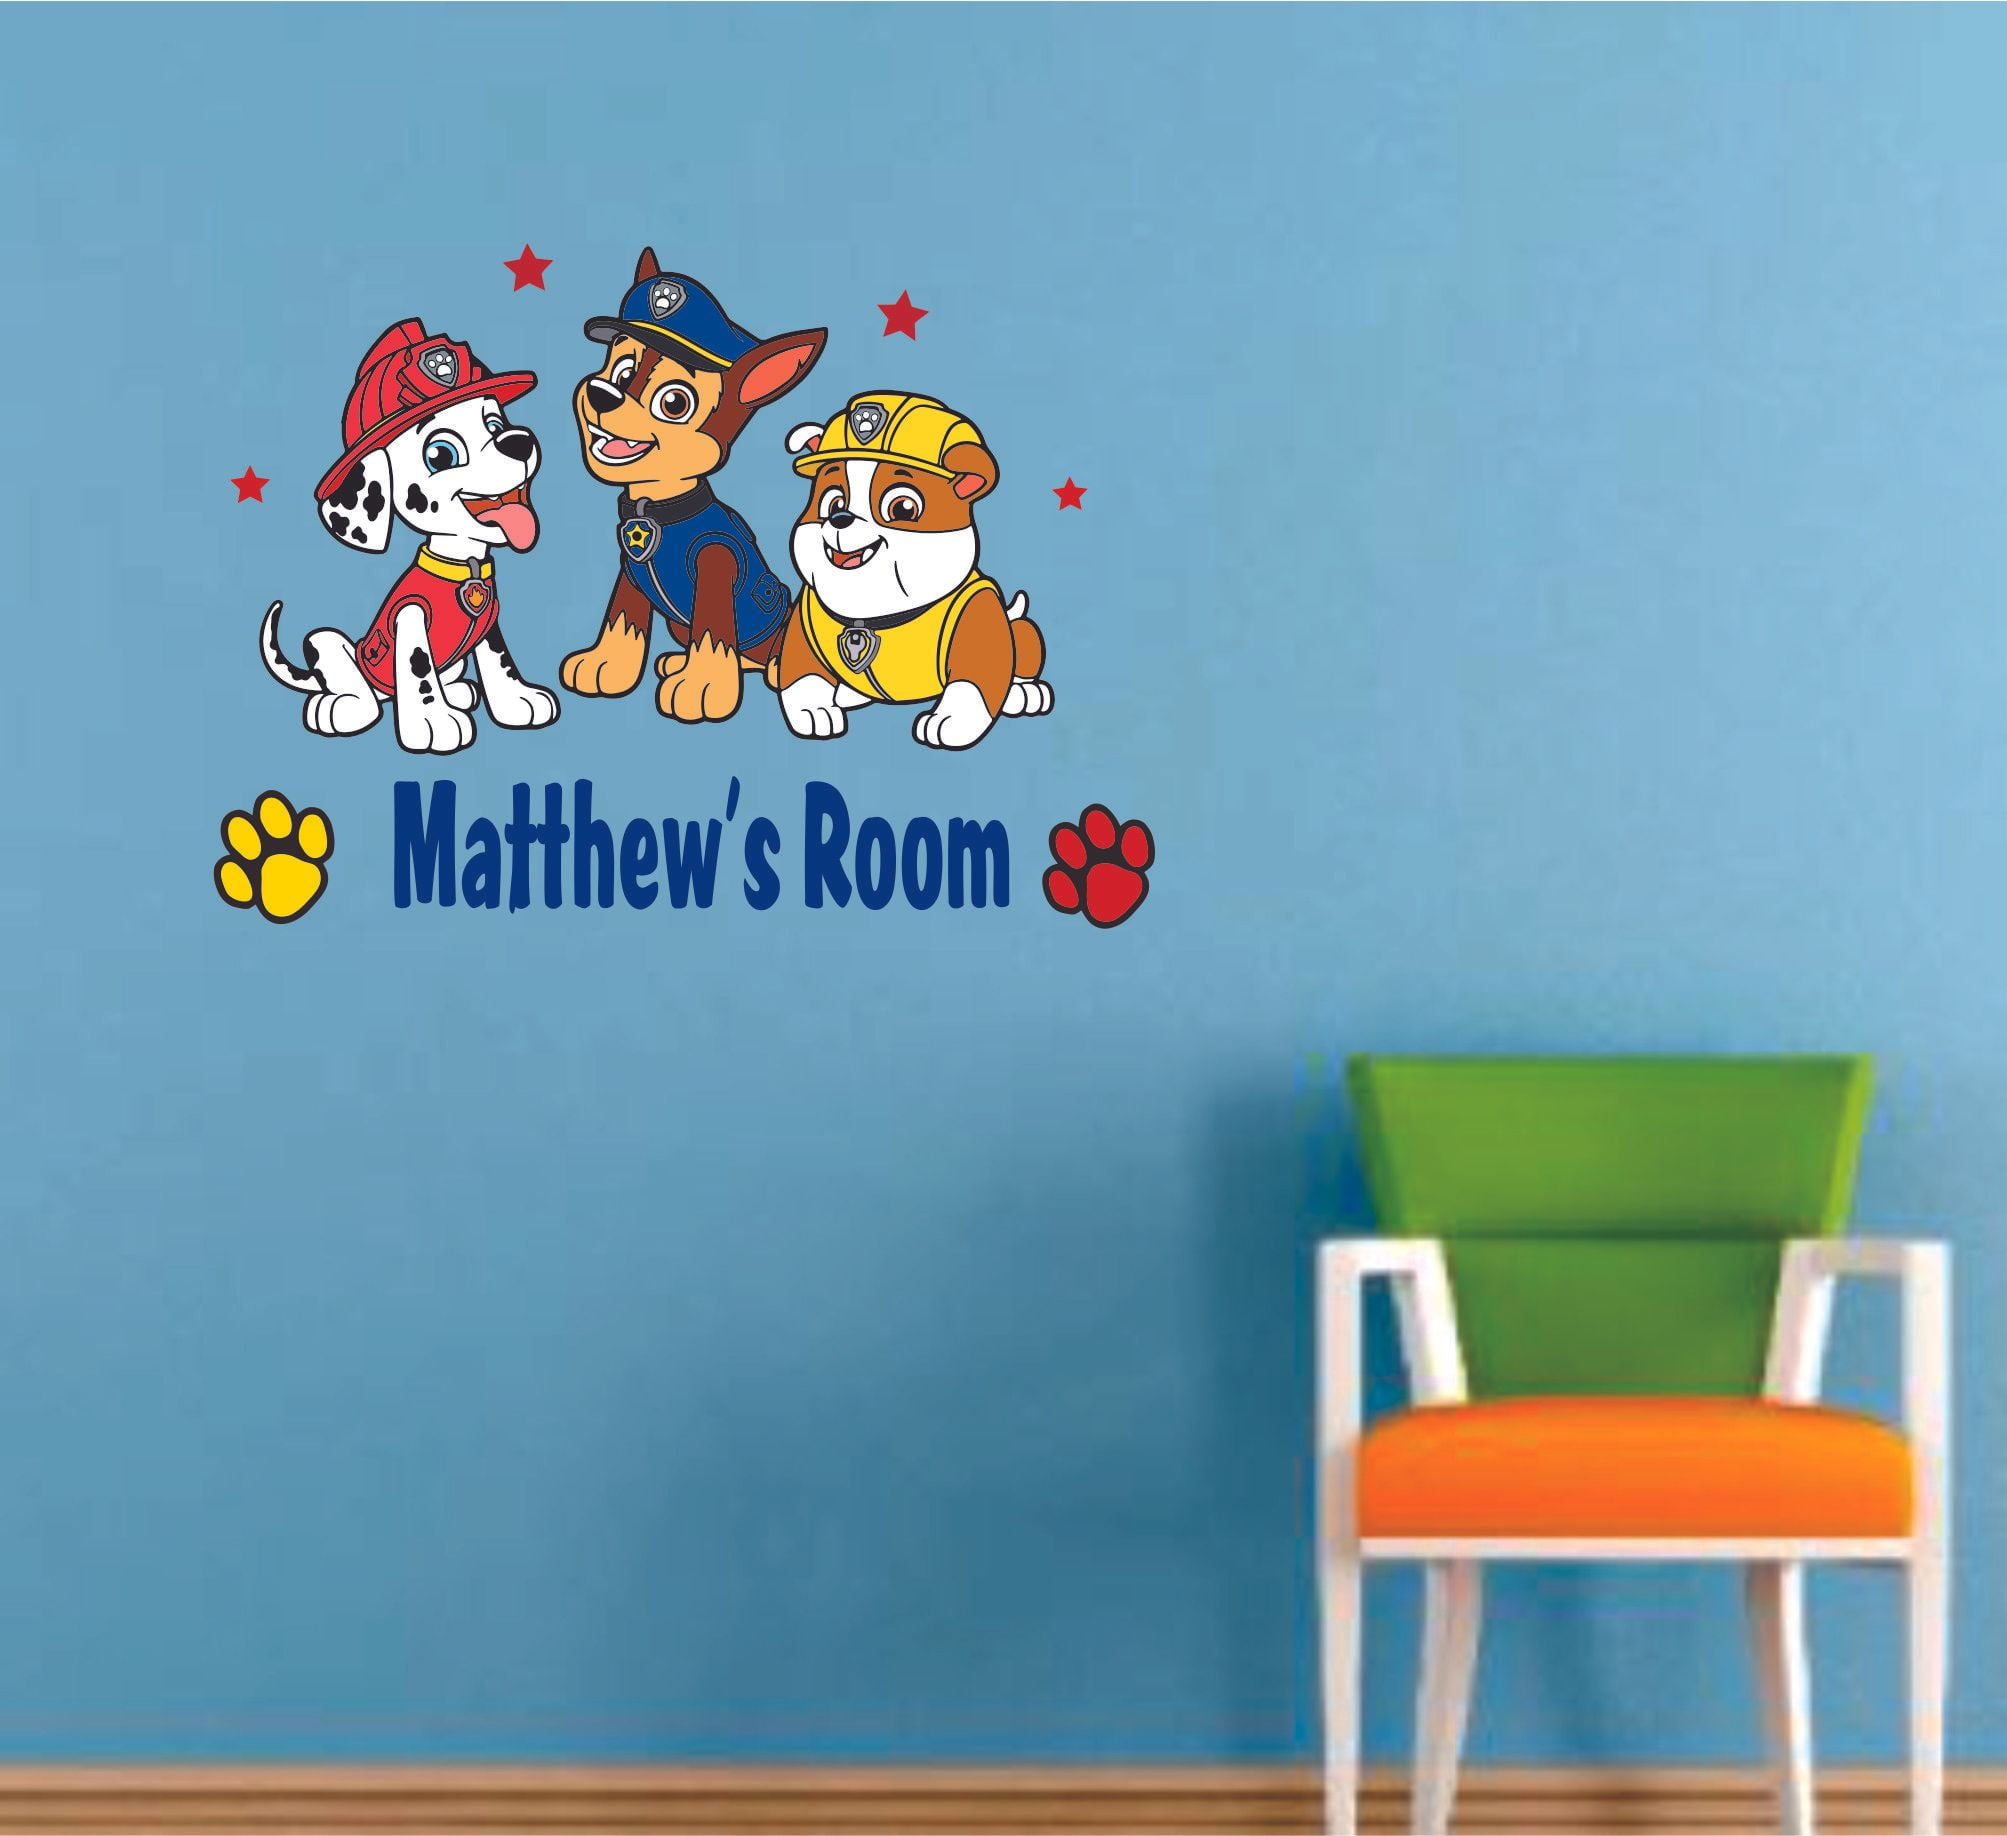 PAW PATROL EVEREST PERSONALISED WALL STICKER childrens bedroom decal art graphic